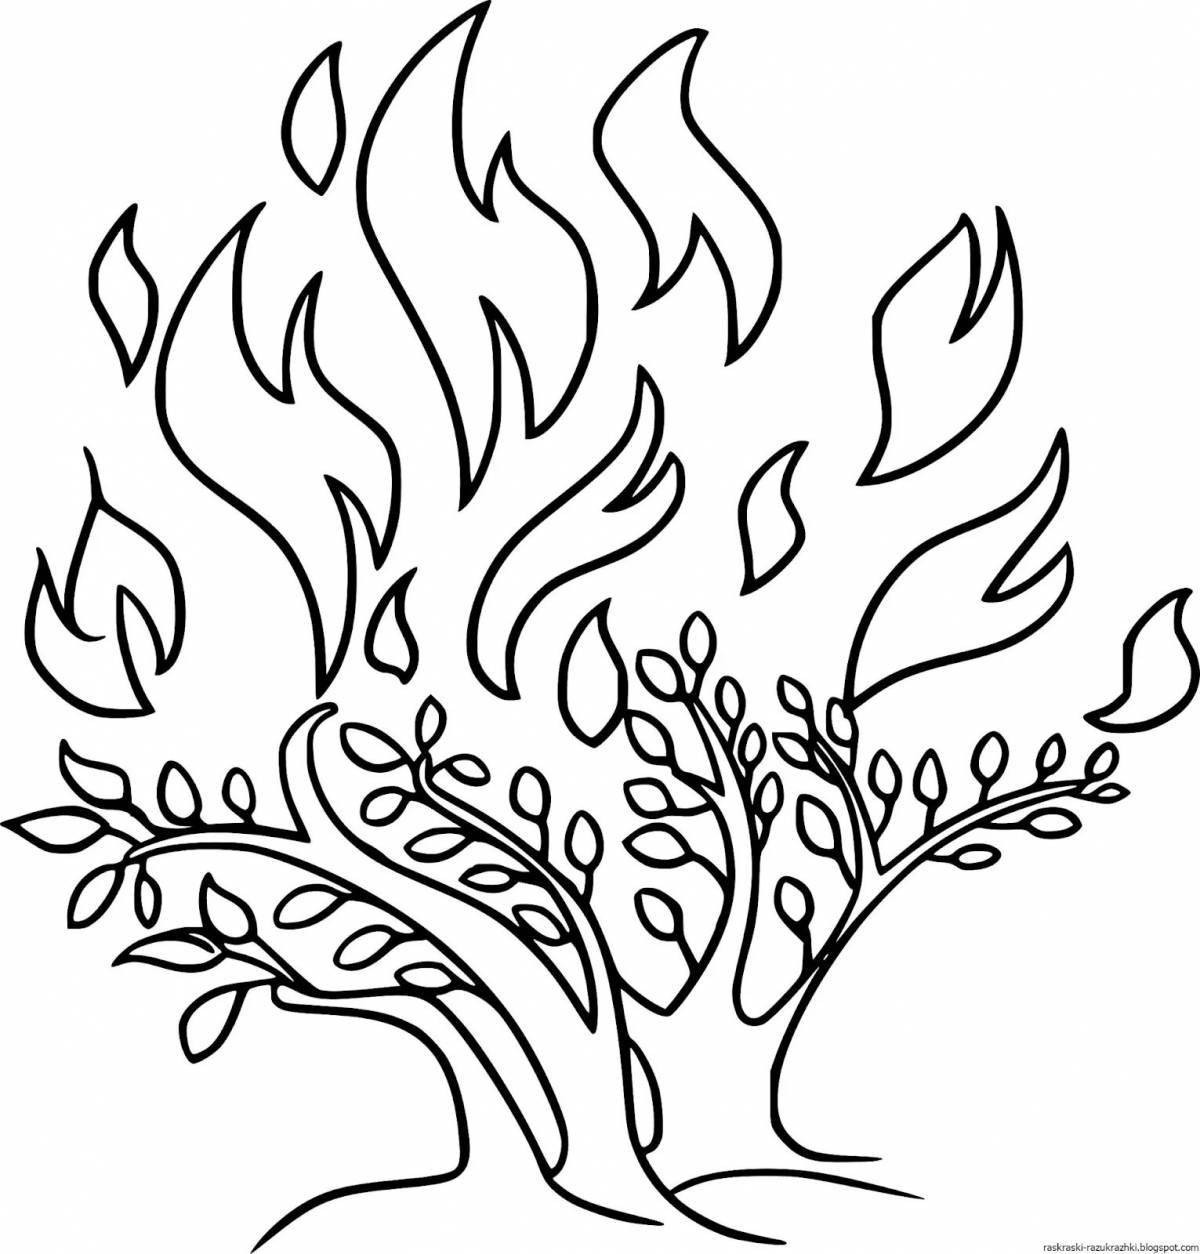 Animated fire enemy coloring page